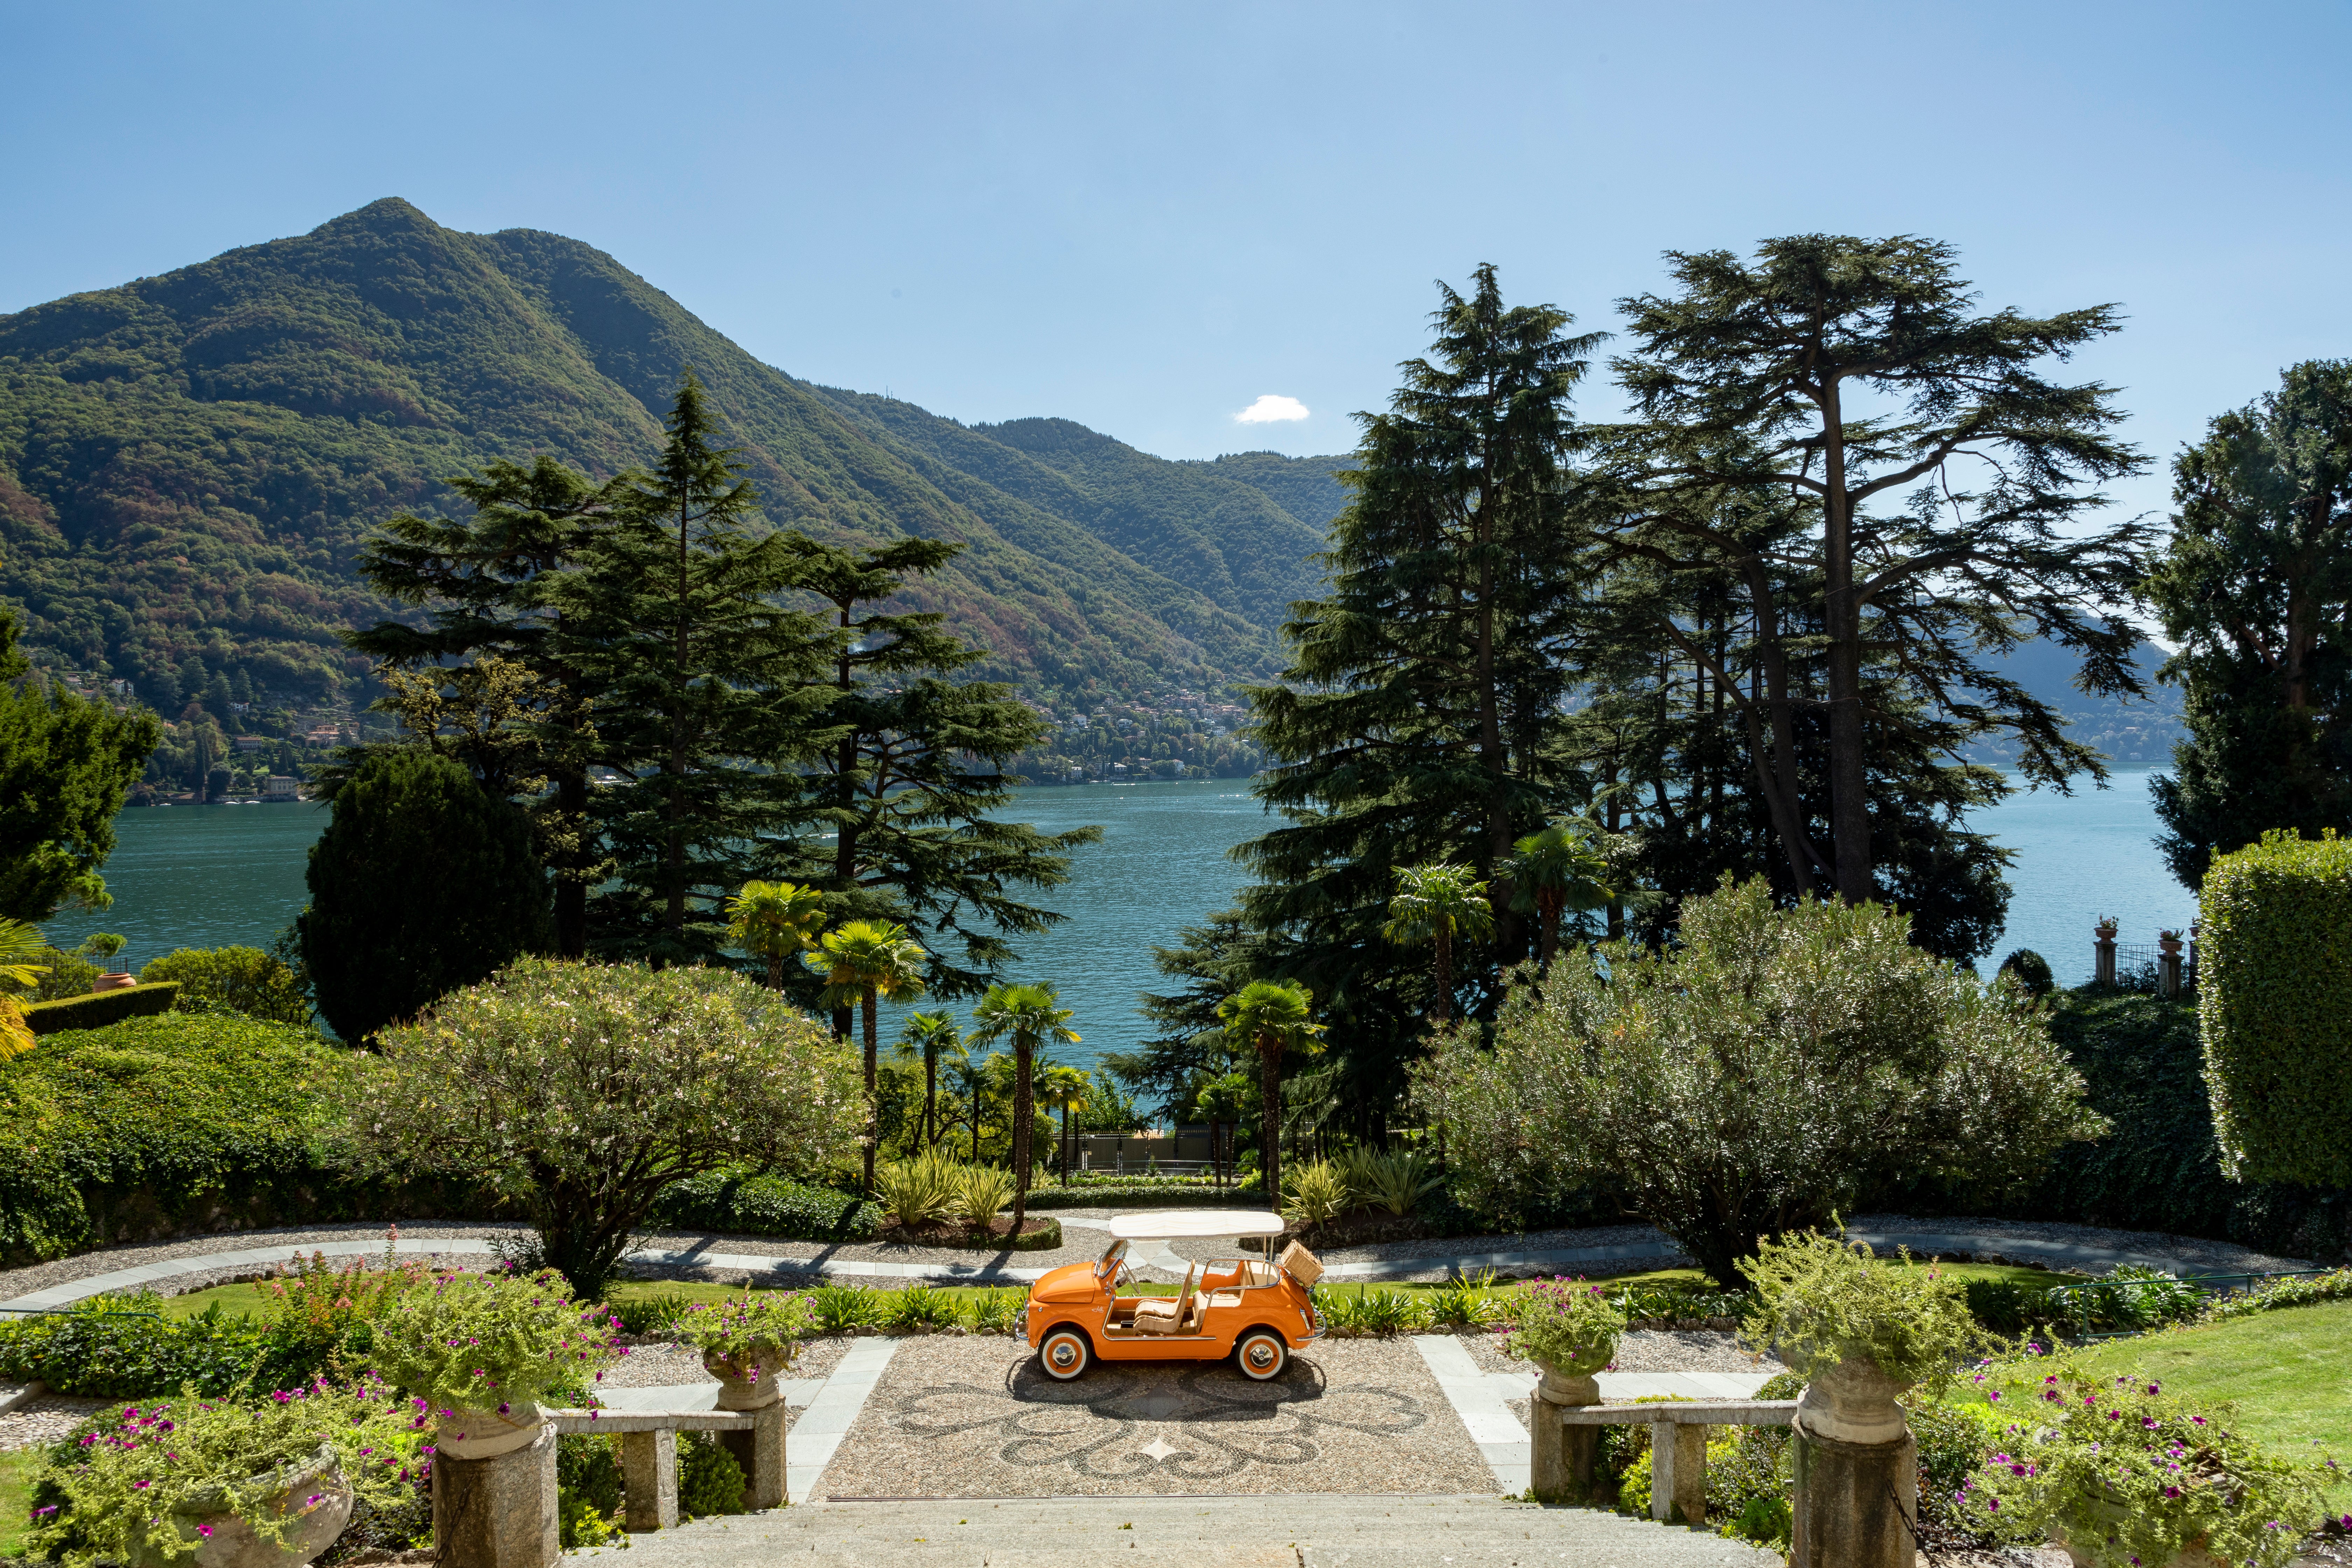 There’s nothing quite so luxurious or relaxing as a trip to the Italian lakes